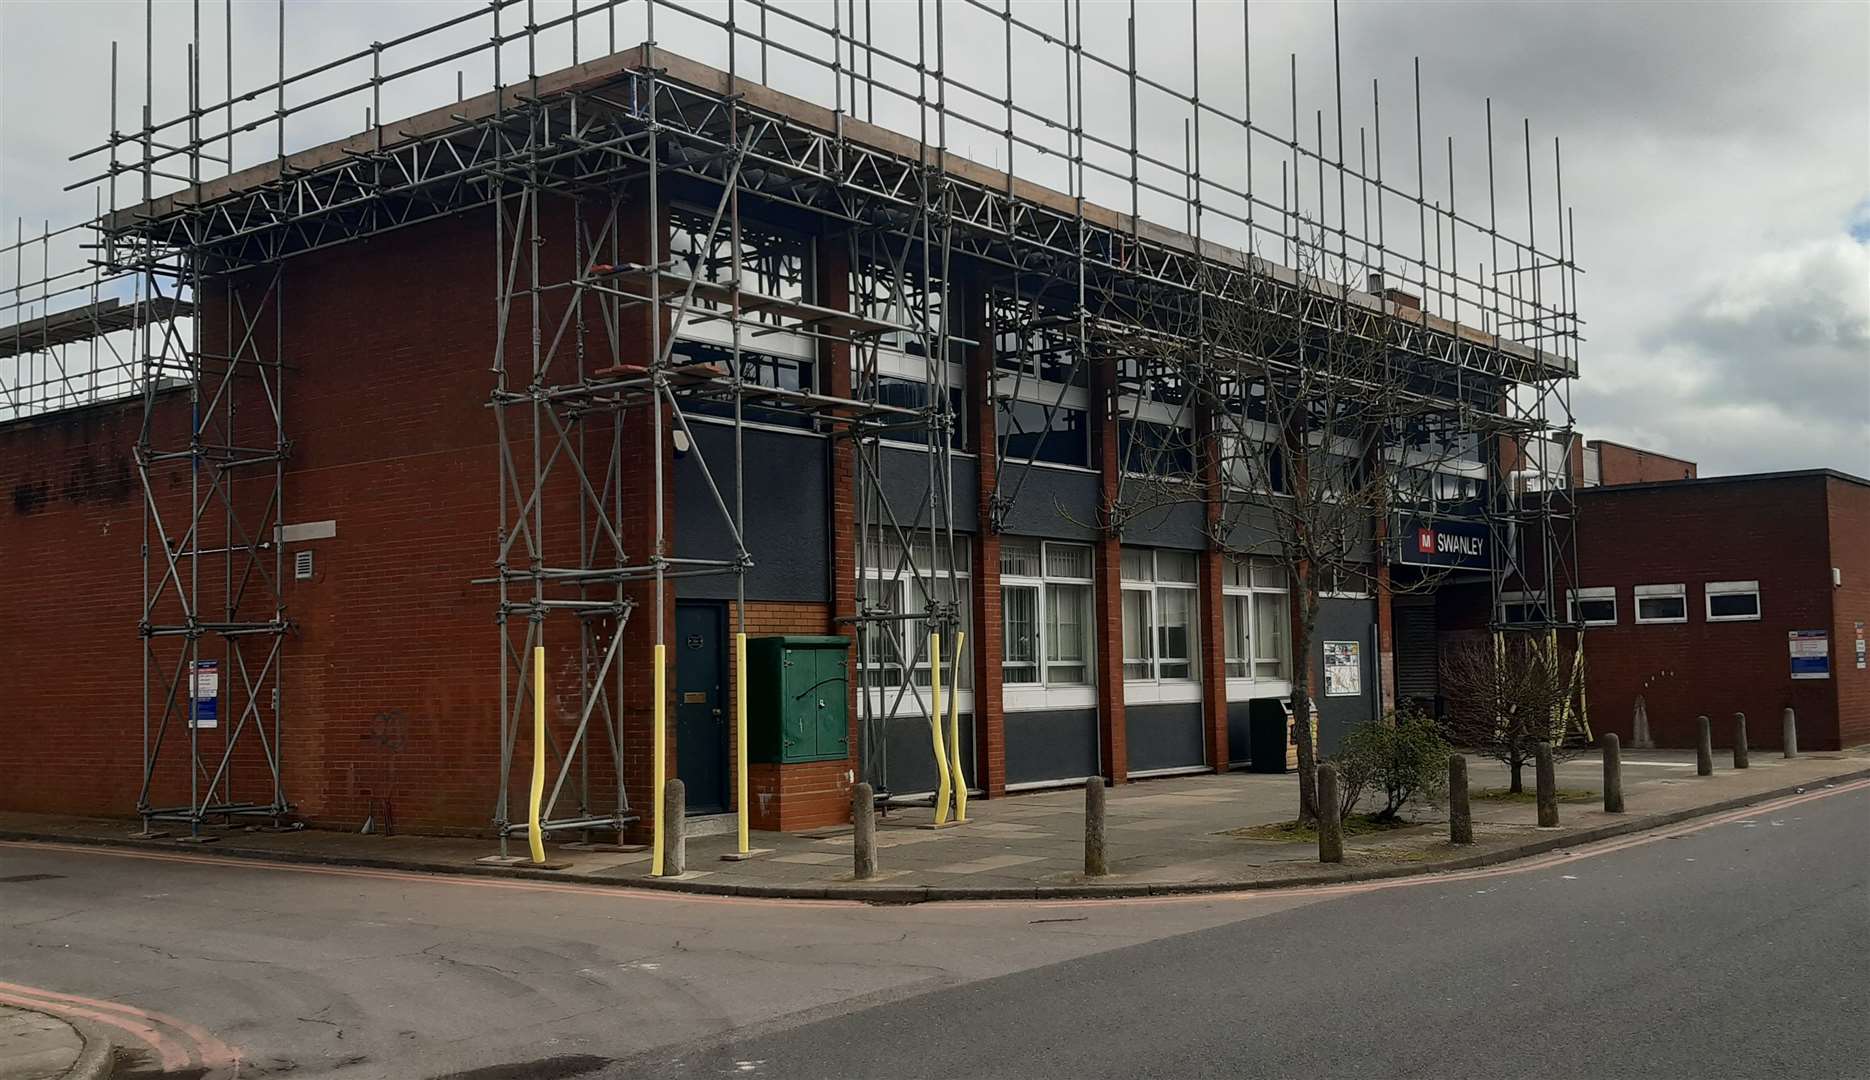 Plans have been submitted to turn the unit into a McDonald's restaurant